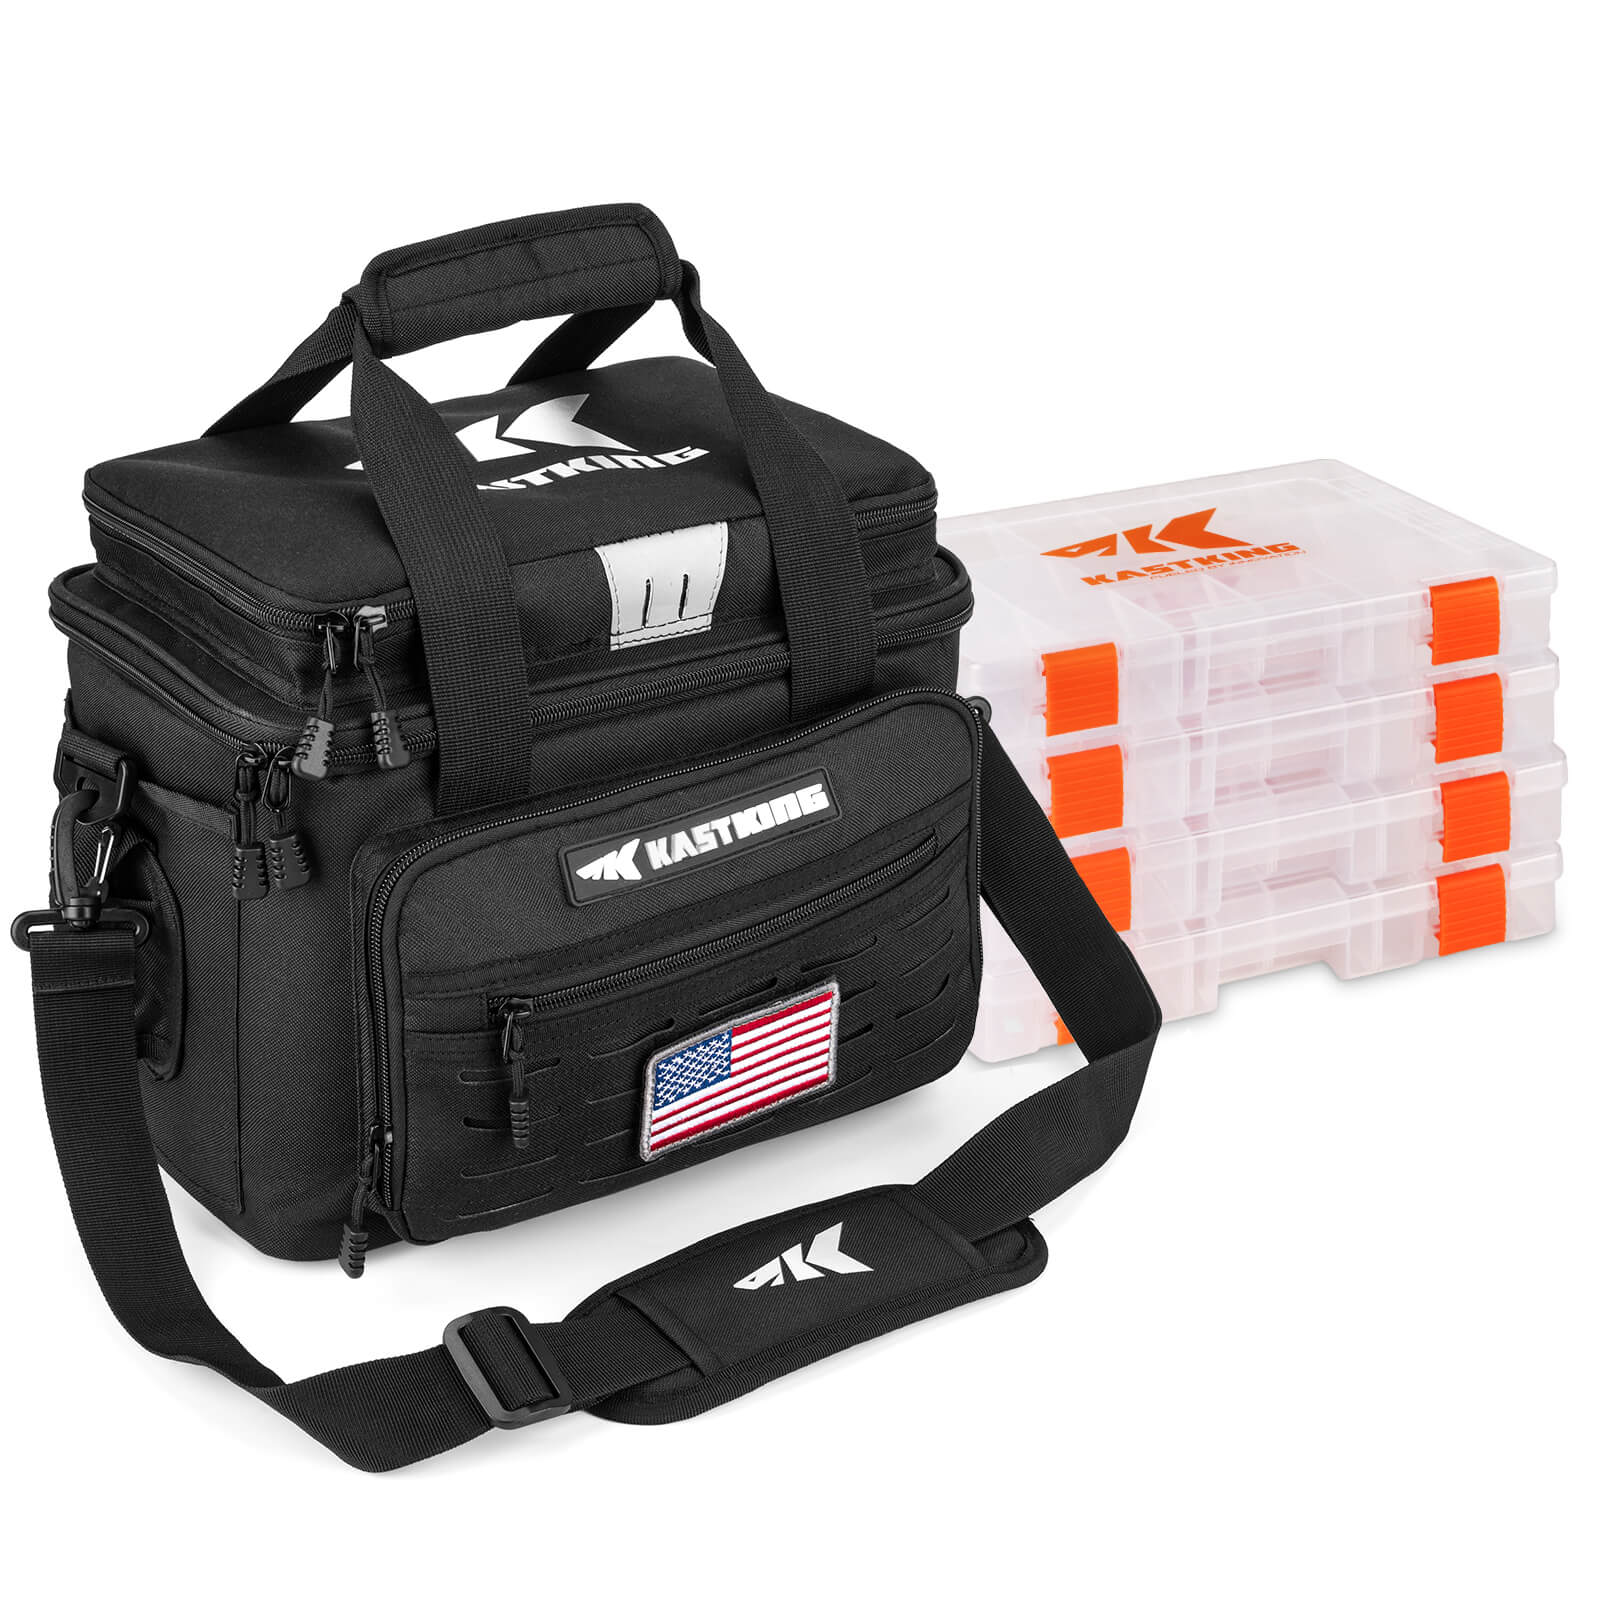 Kastking fishing tackle bag . Without trays,26.4/11/15.4 inches